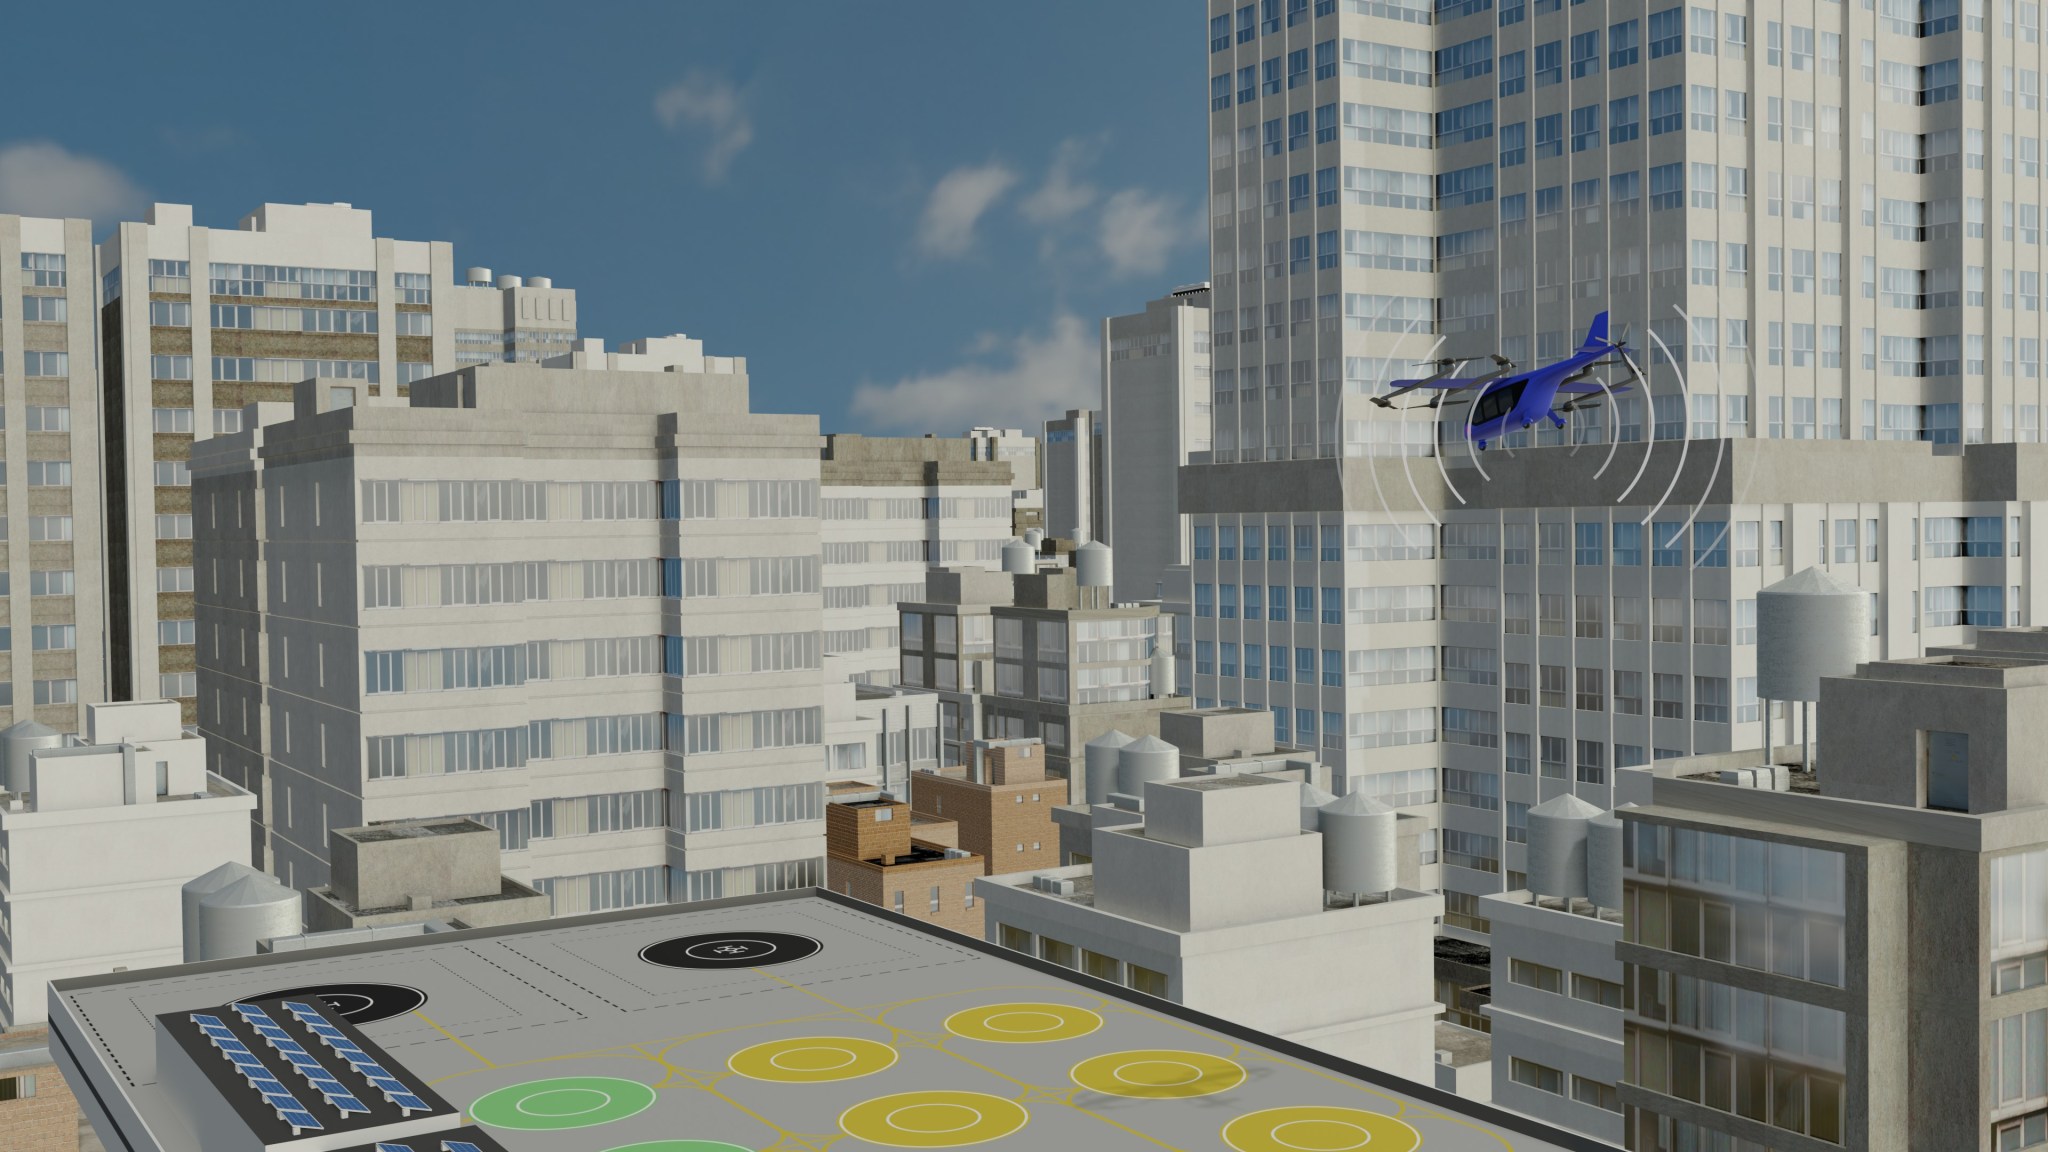 Advanced Air Mobility Aircraft hovering over an urban center